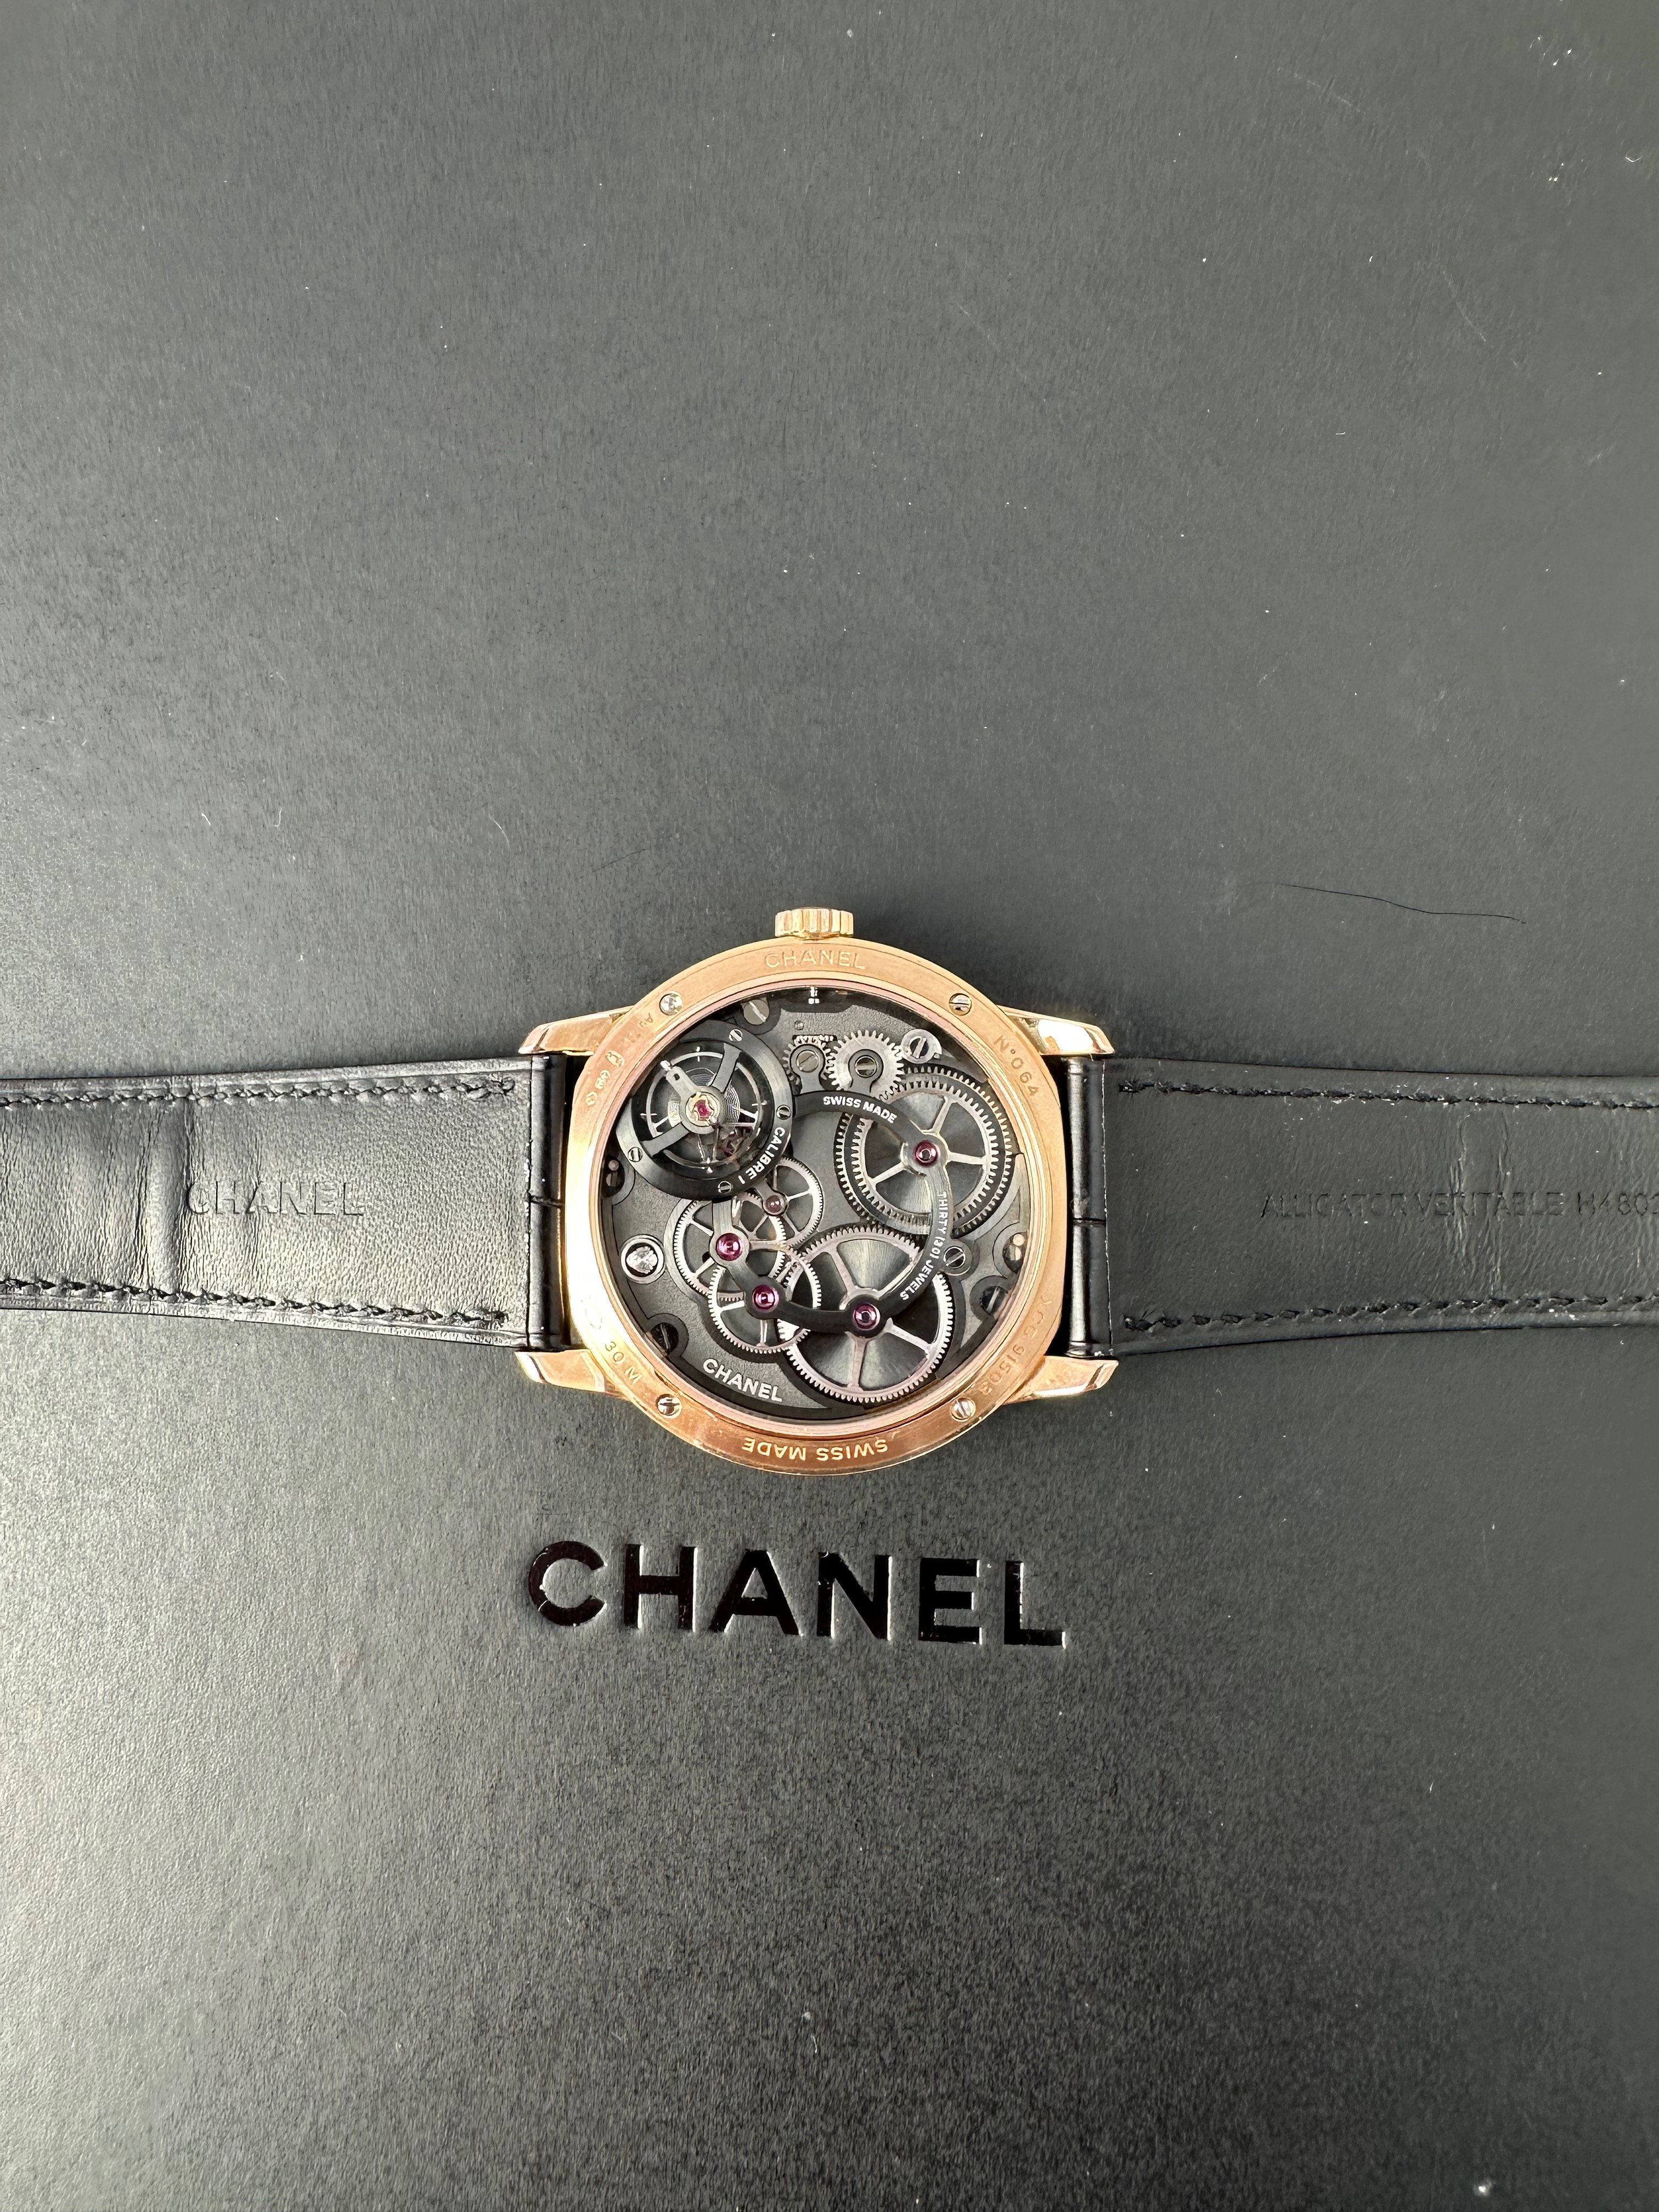 Chanel - The Beauty in Everything Lot 8030 November 2022